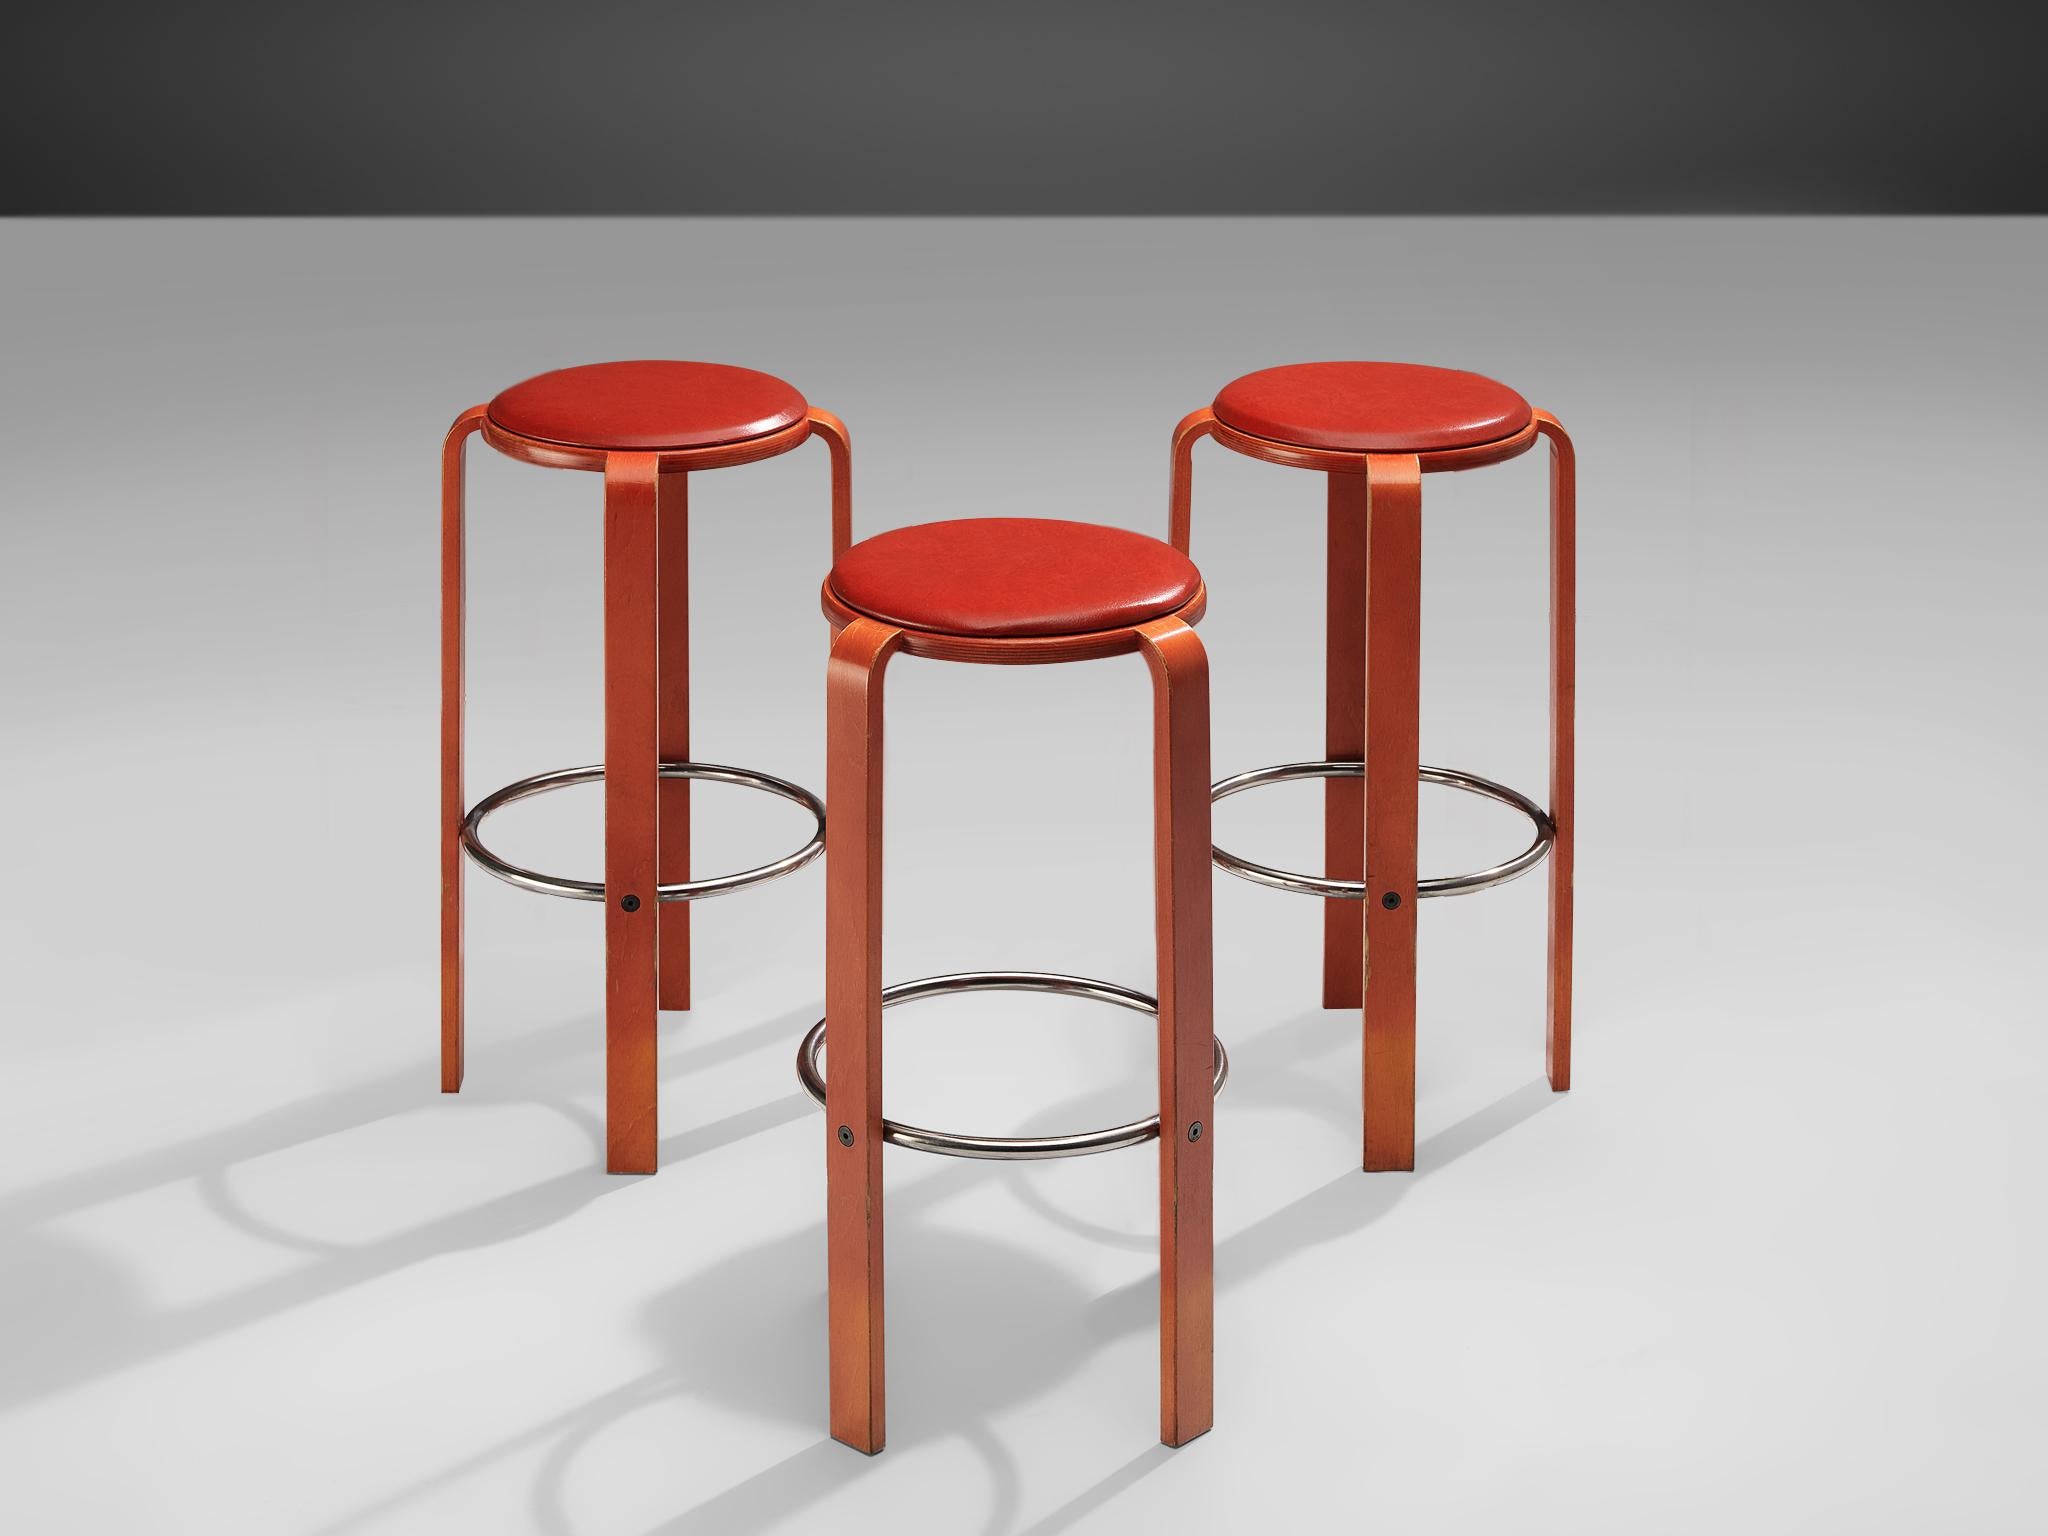 Bruno Rey for Dietiker, set of three barstools, plywood, aluminum and leather, Switzerland, 1970s

Constructed from vibrant red lacquered wood, the stools exude a sense of warmth and sophistication, while the padded seats, luxuriously finished with